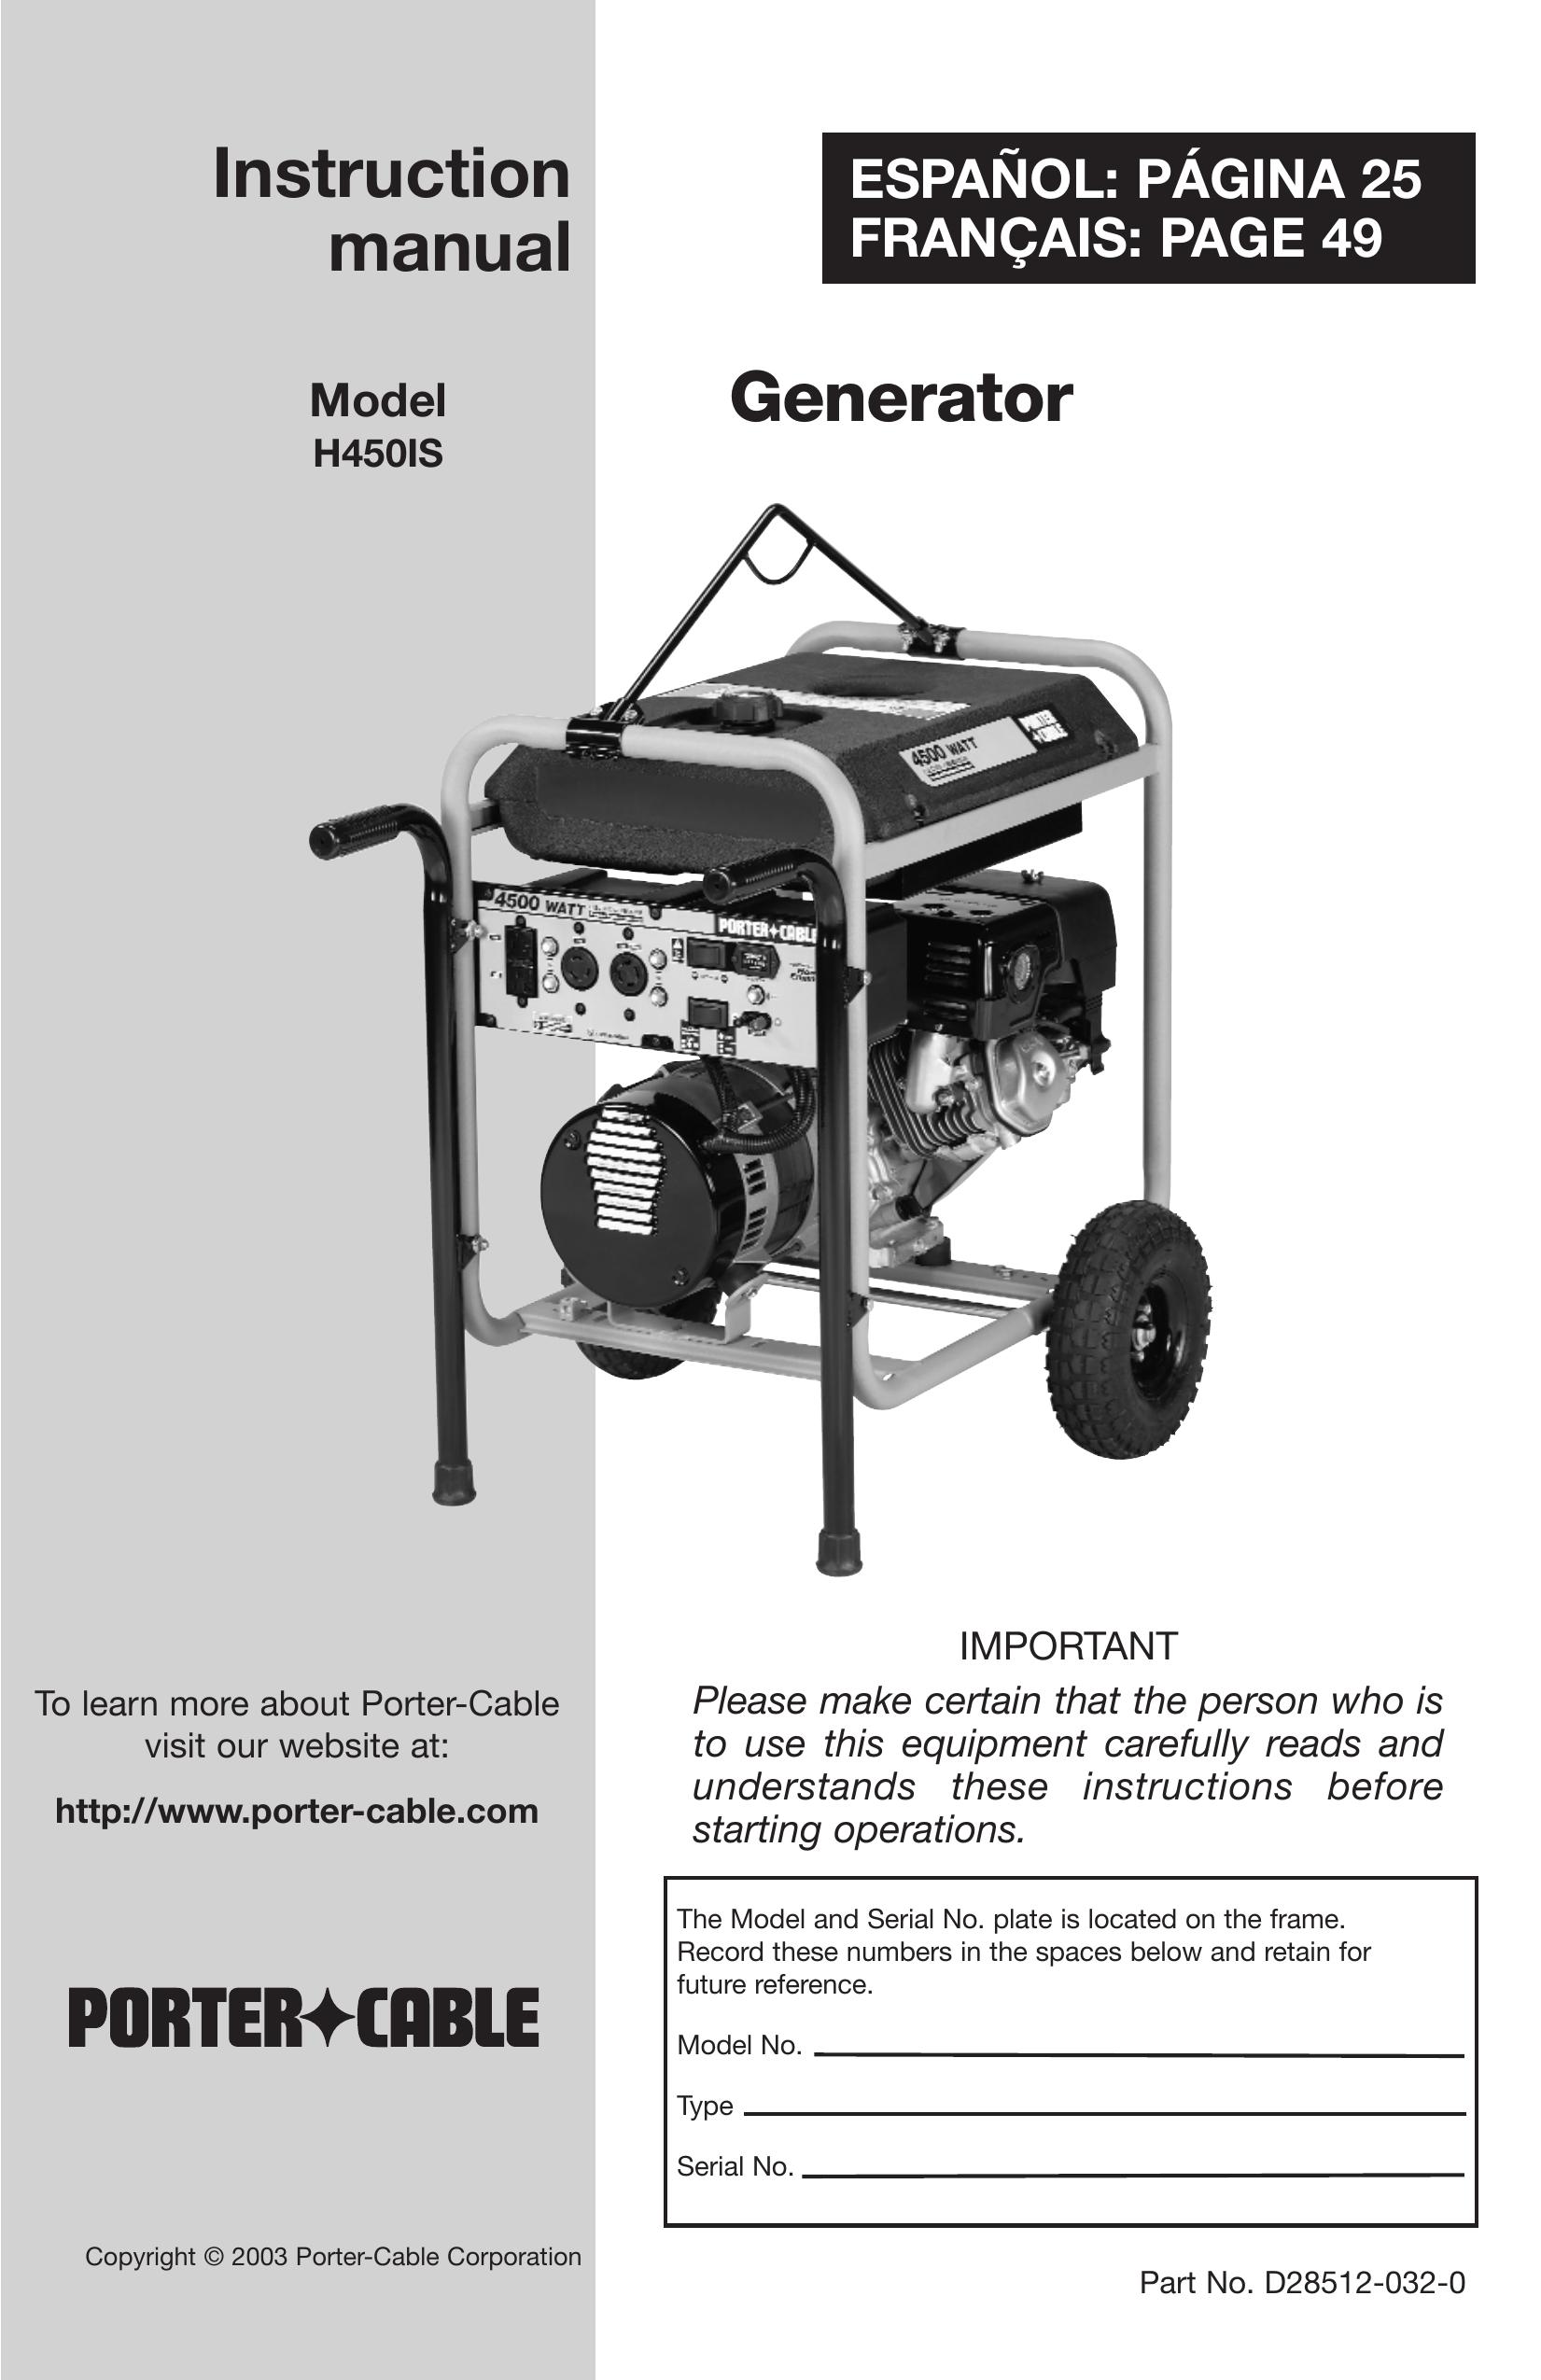 Porter-Cable H450IS Portable Generator User Manual